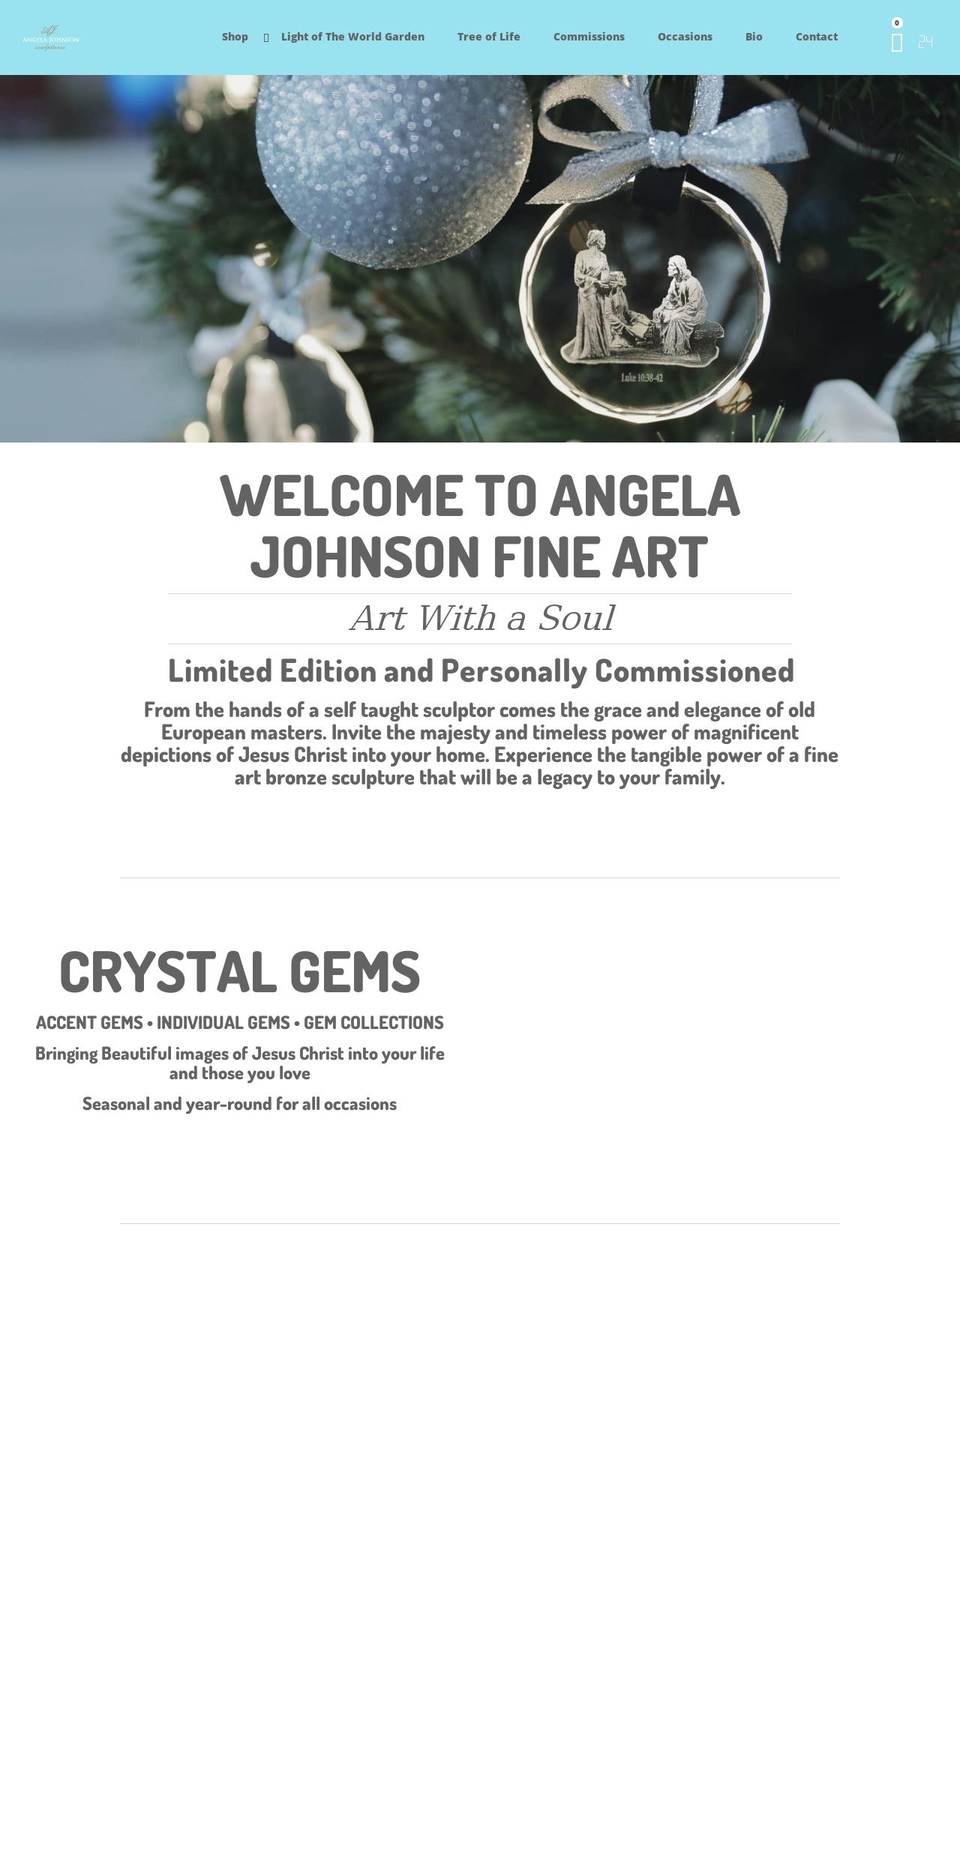 layla Shopify theme site example ajsculptures.com